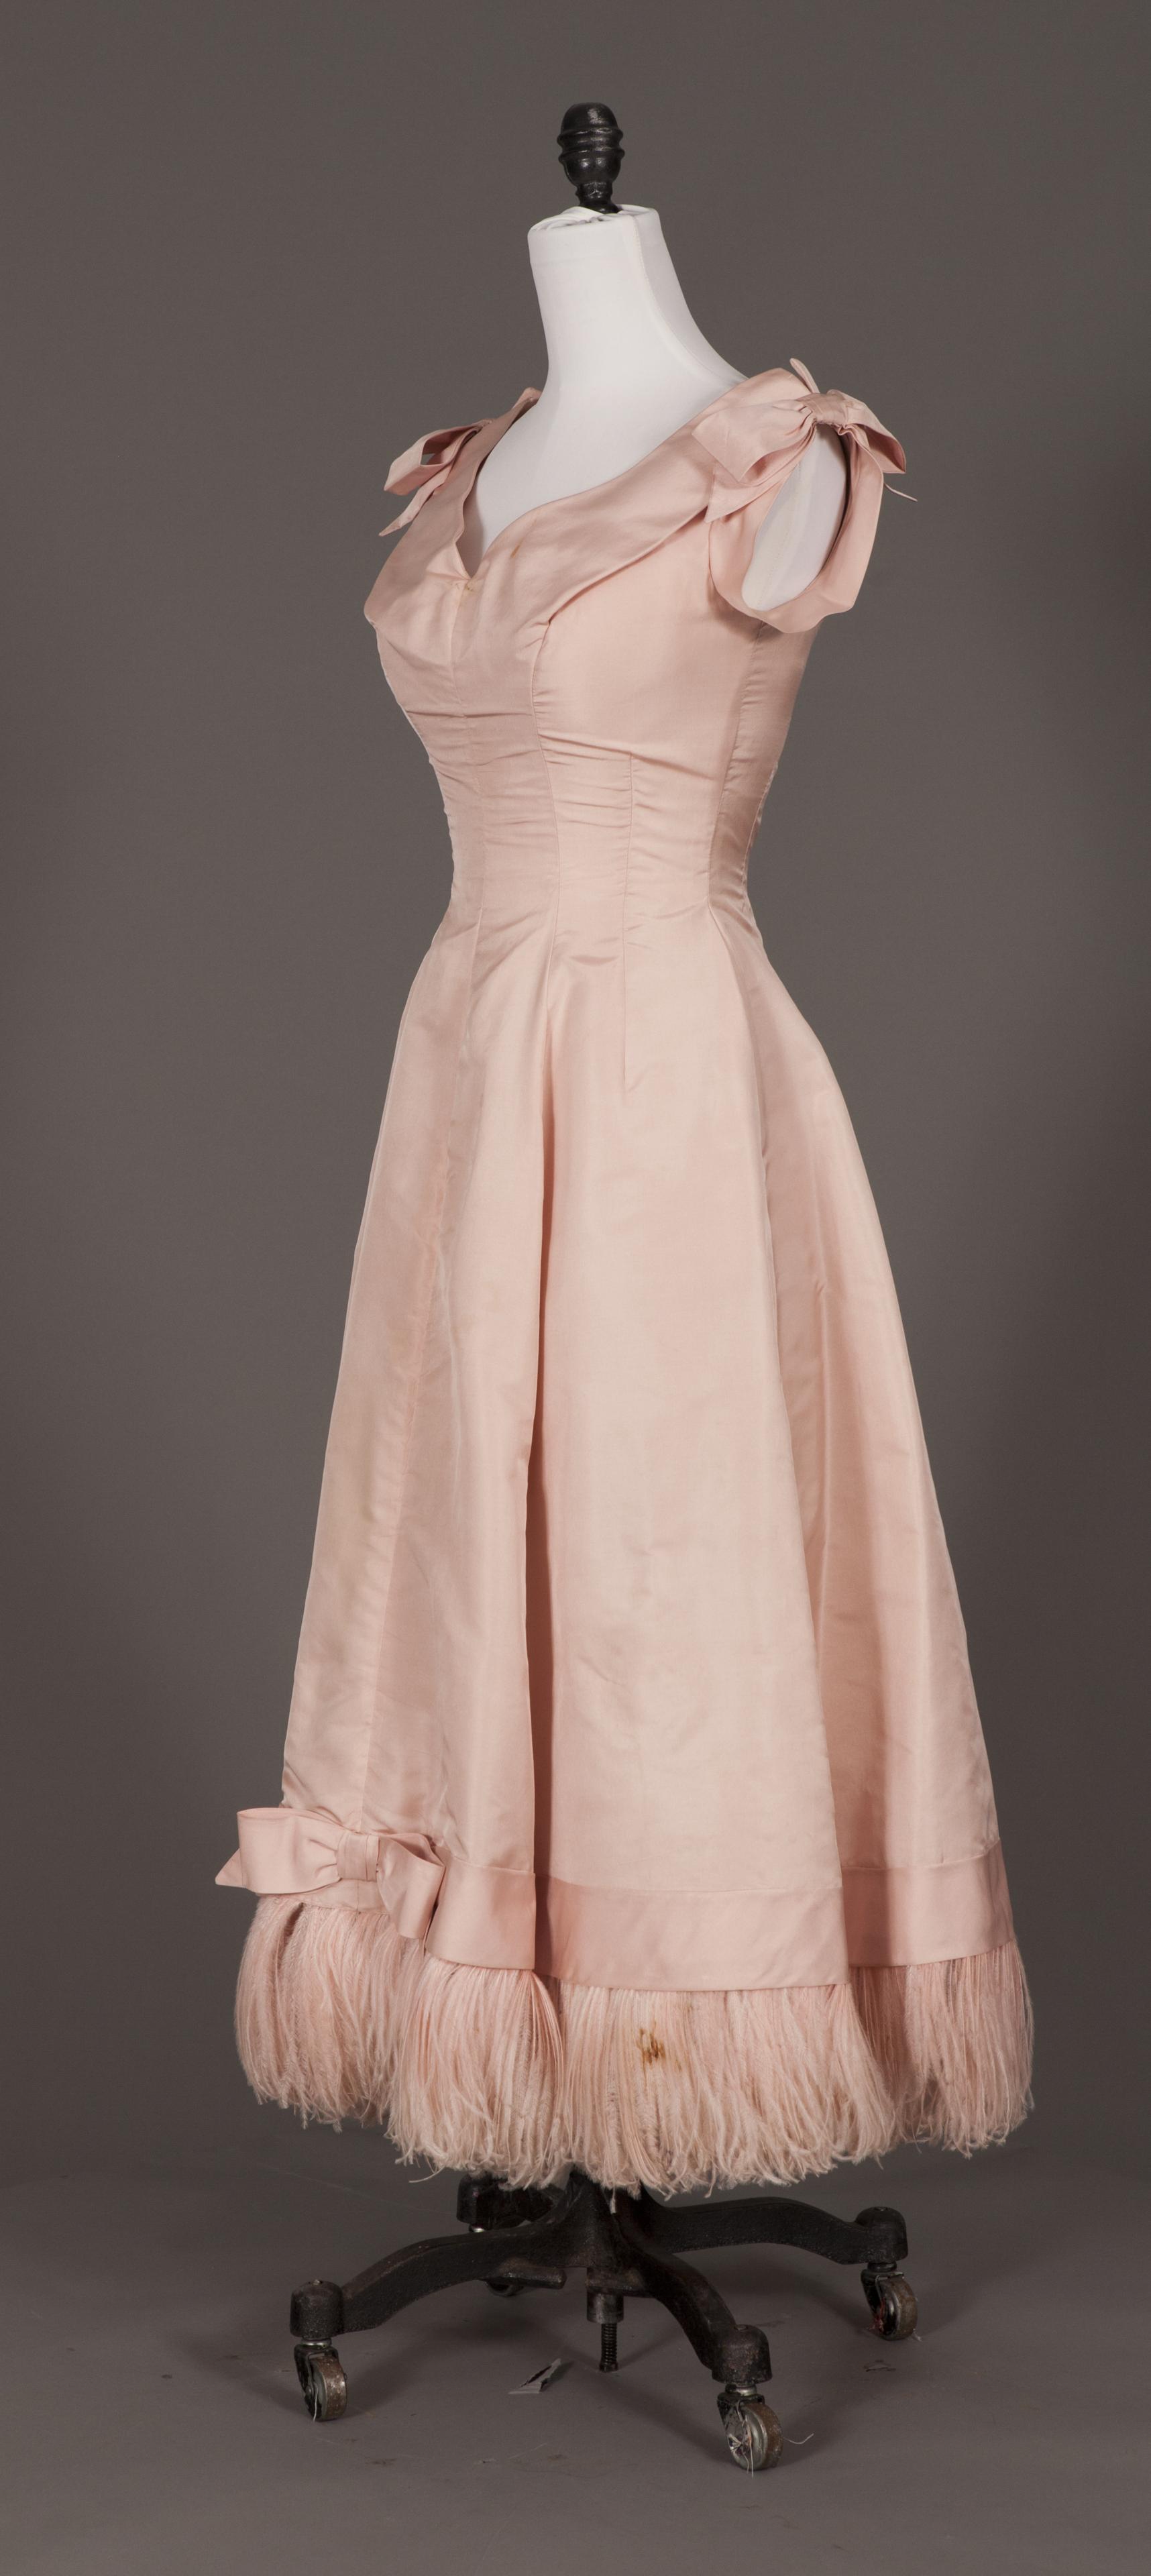 A still from an objectVR of a dress from Vassar's collection of historic clothing